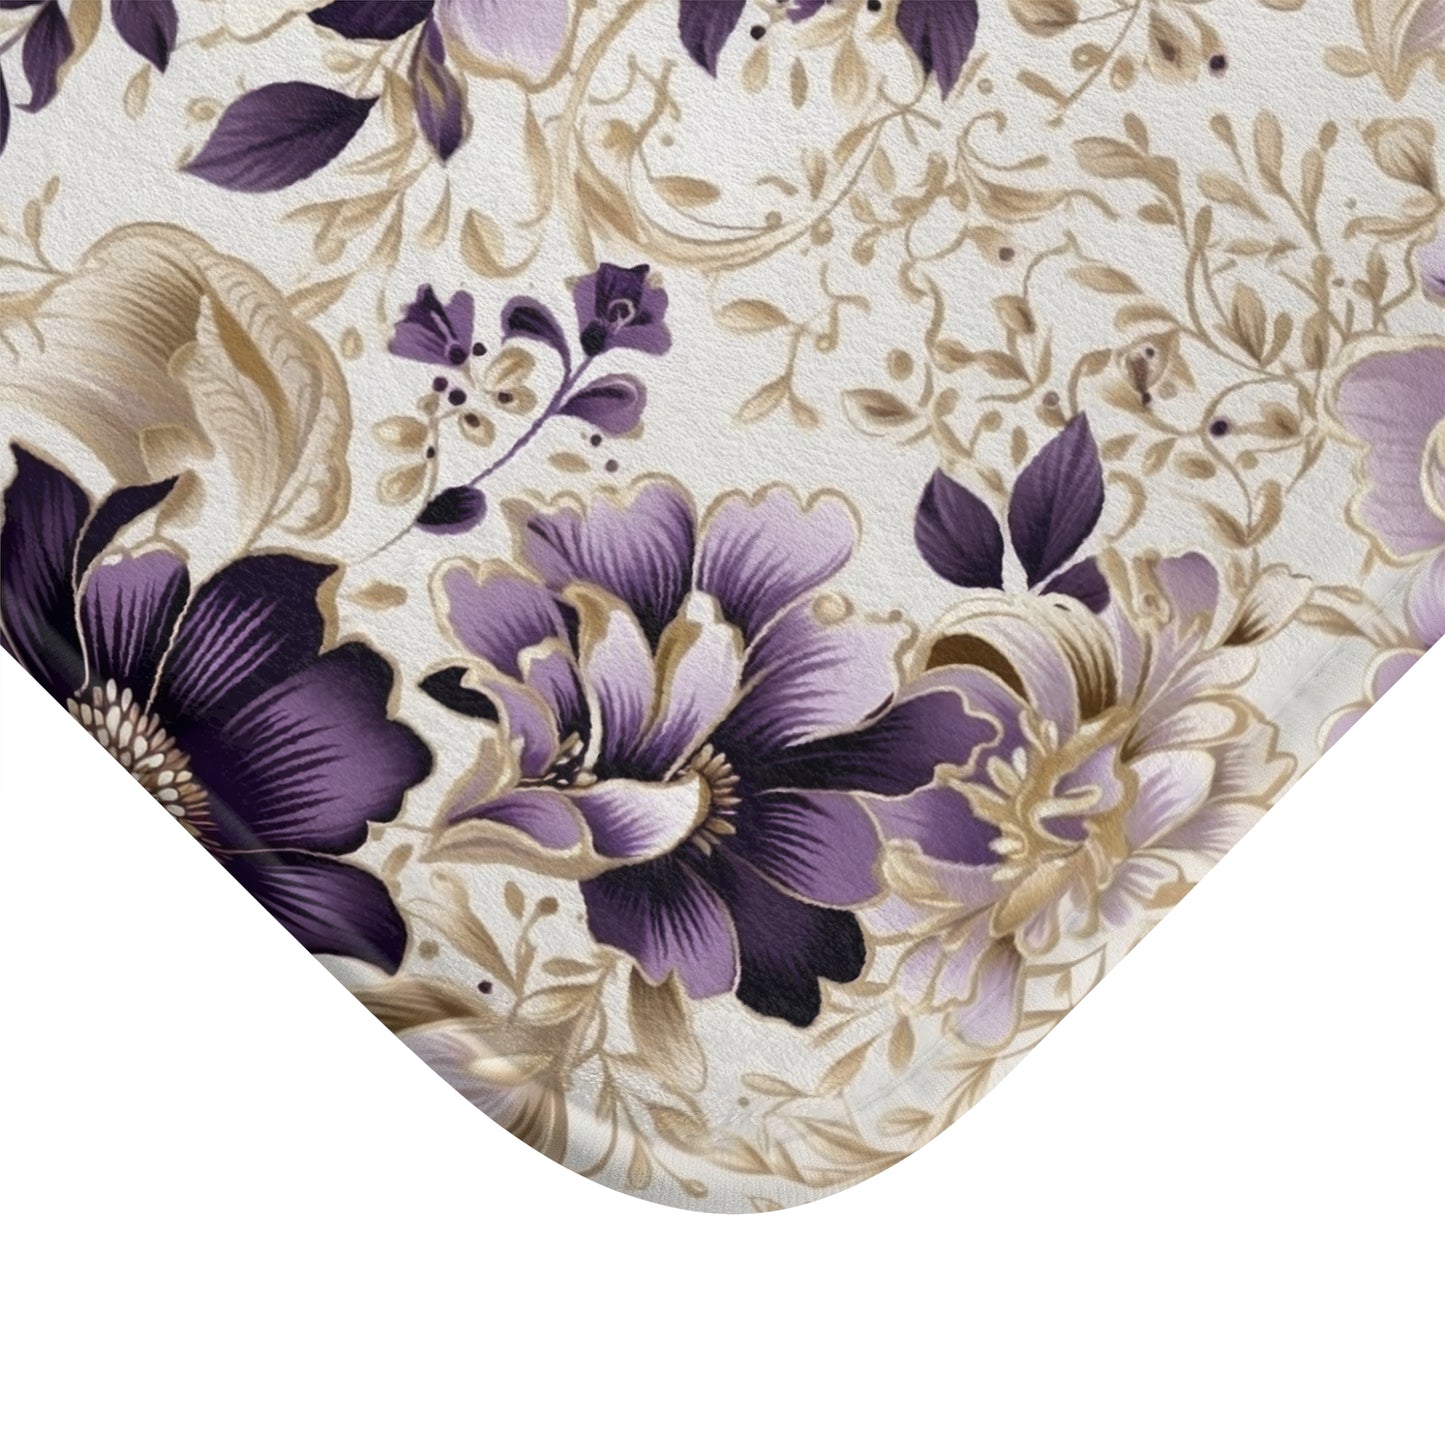 Purple Majesty: Watercolor Floral Design with Gold Foliage Accents - Bathroom Non-Slip Mat 2 Sizes